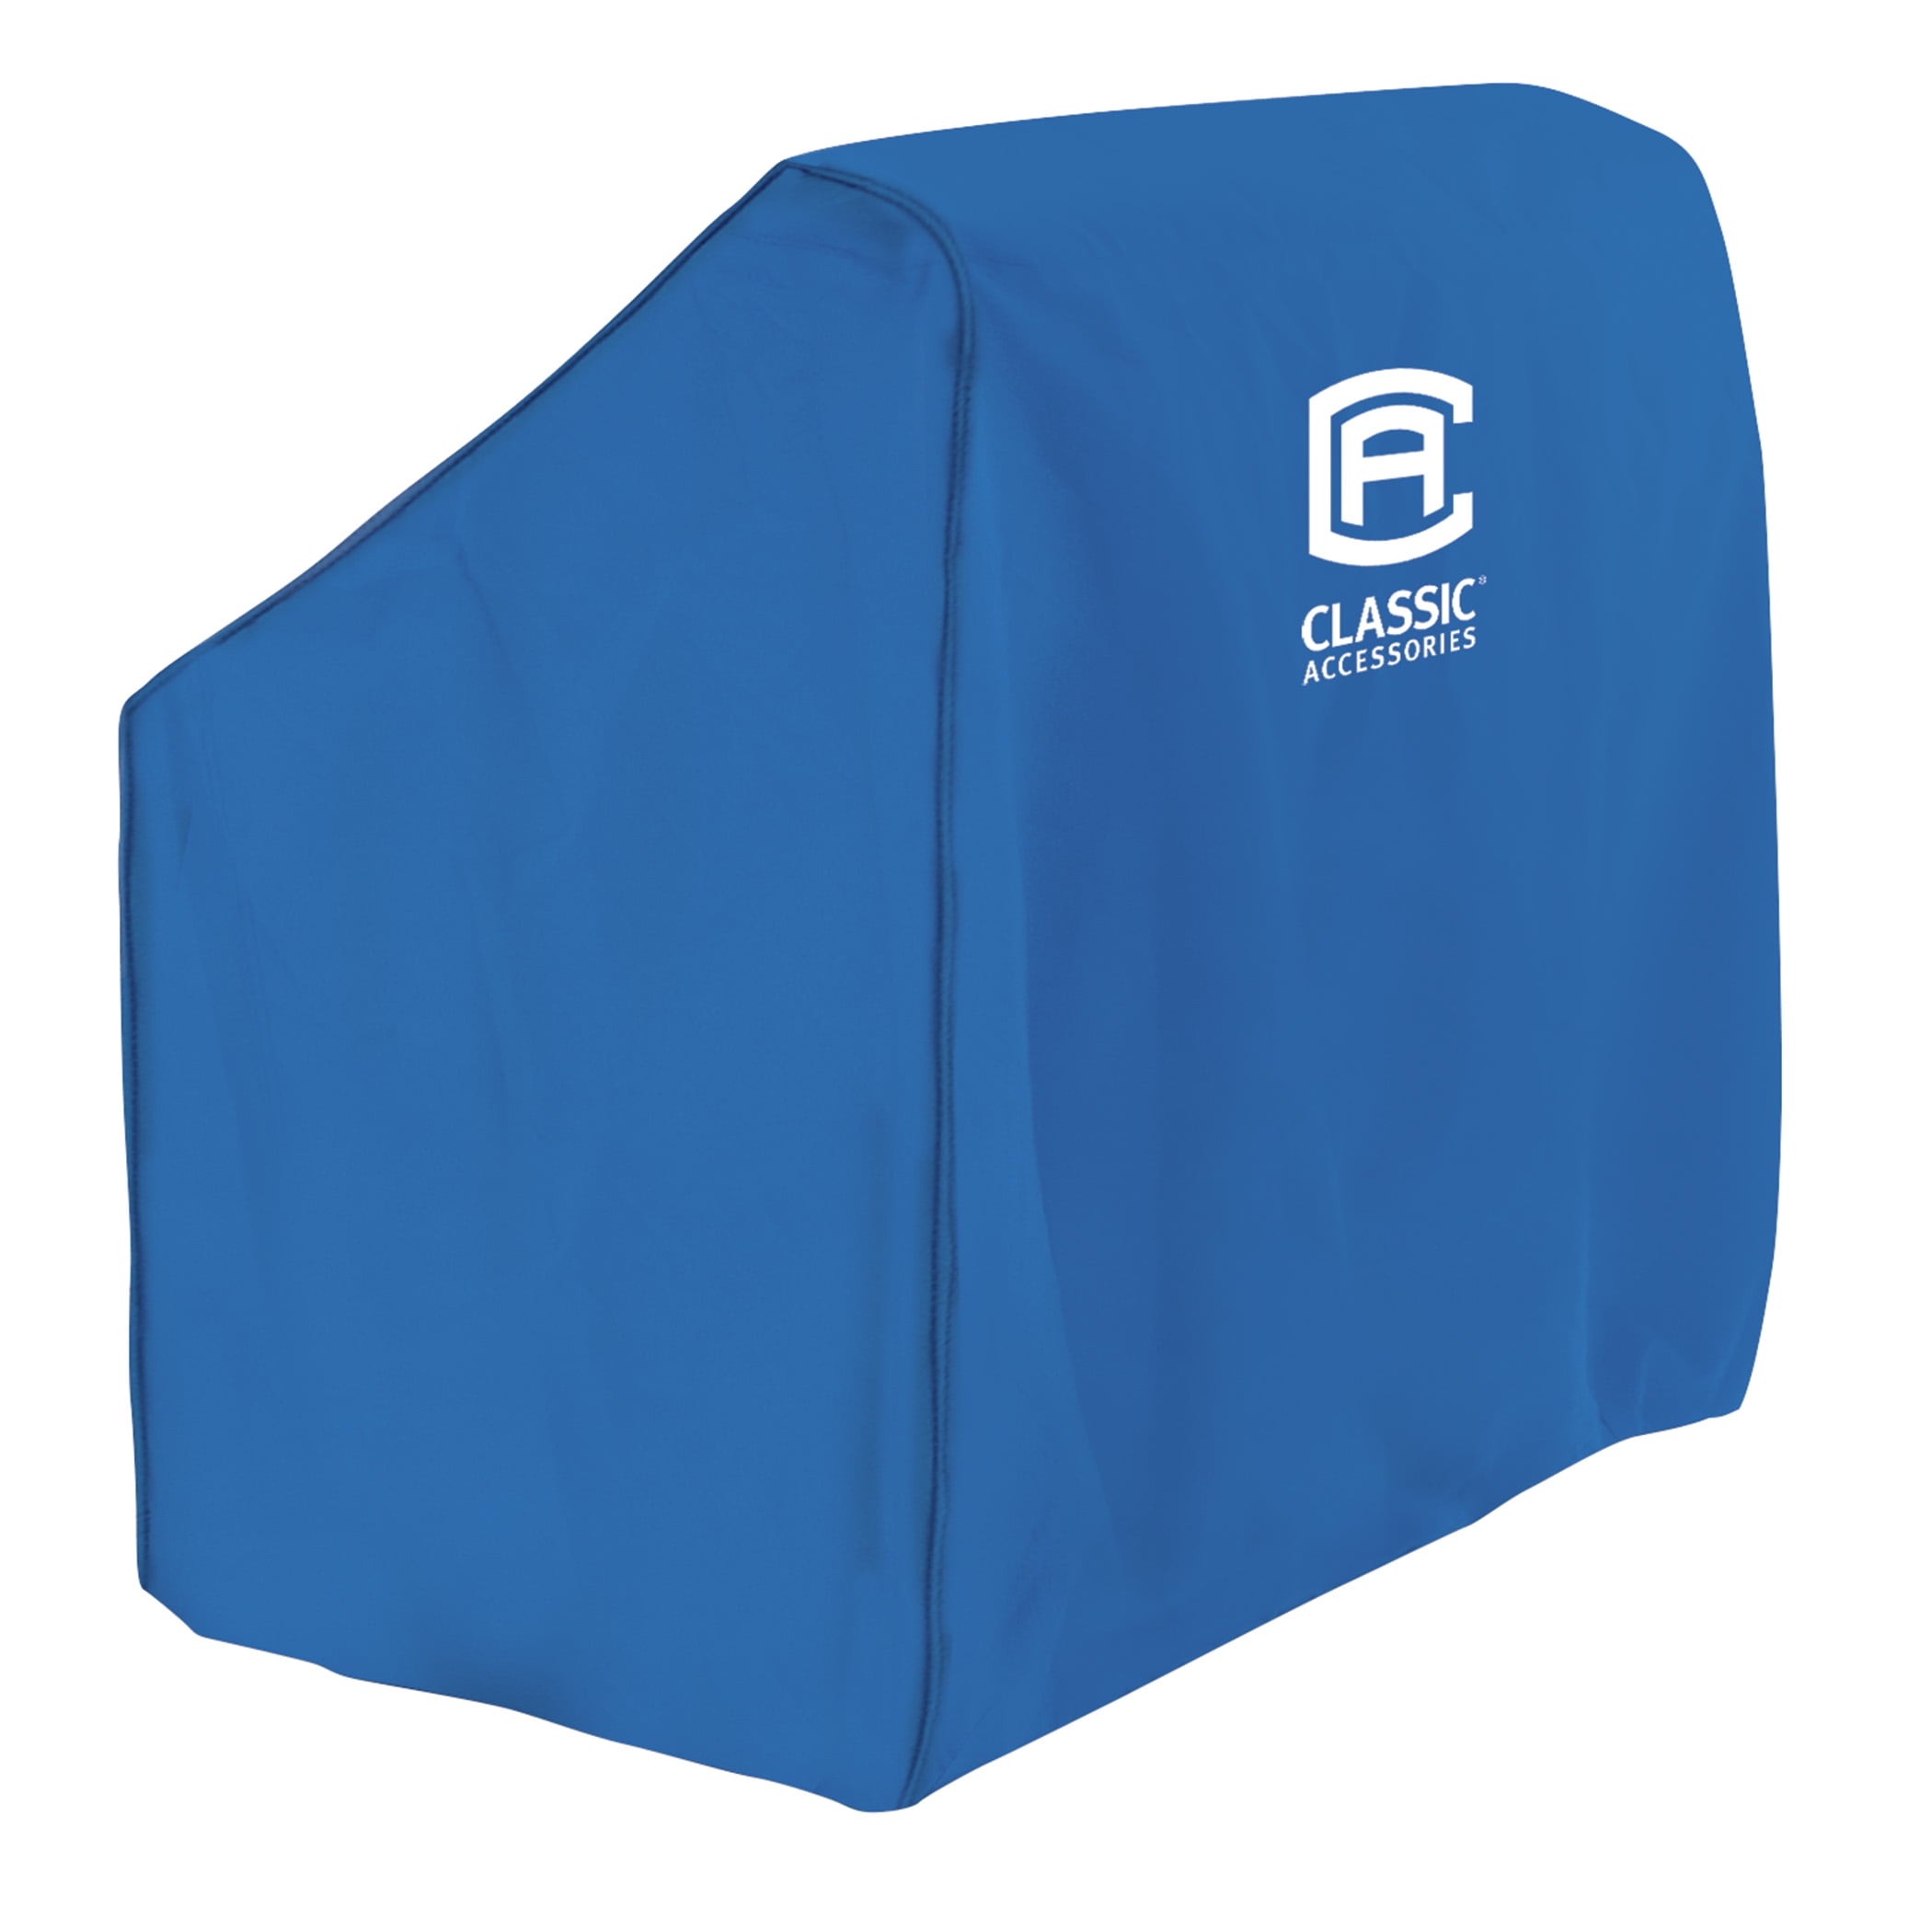 Mildew Resistant and UV Resistant with Thick Polyester Fabric 25-50HP, 50-115 HP,115-225 HP COCO Outboard Motor Cover Waterproof Boat Motor Cover up to